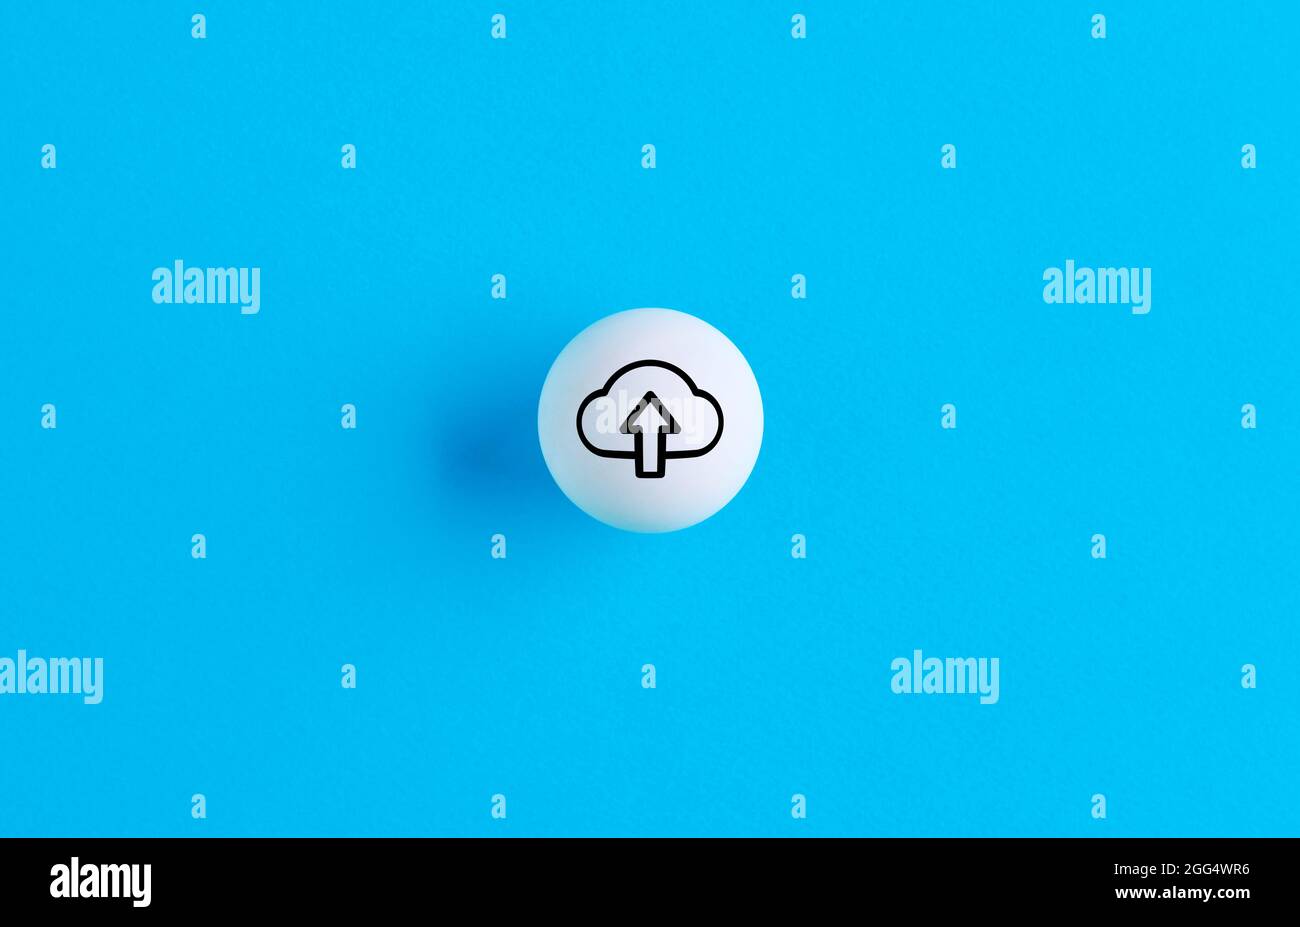 Upload symbol on a ball button on blue background. Stock Photo